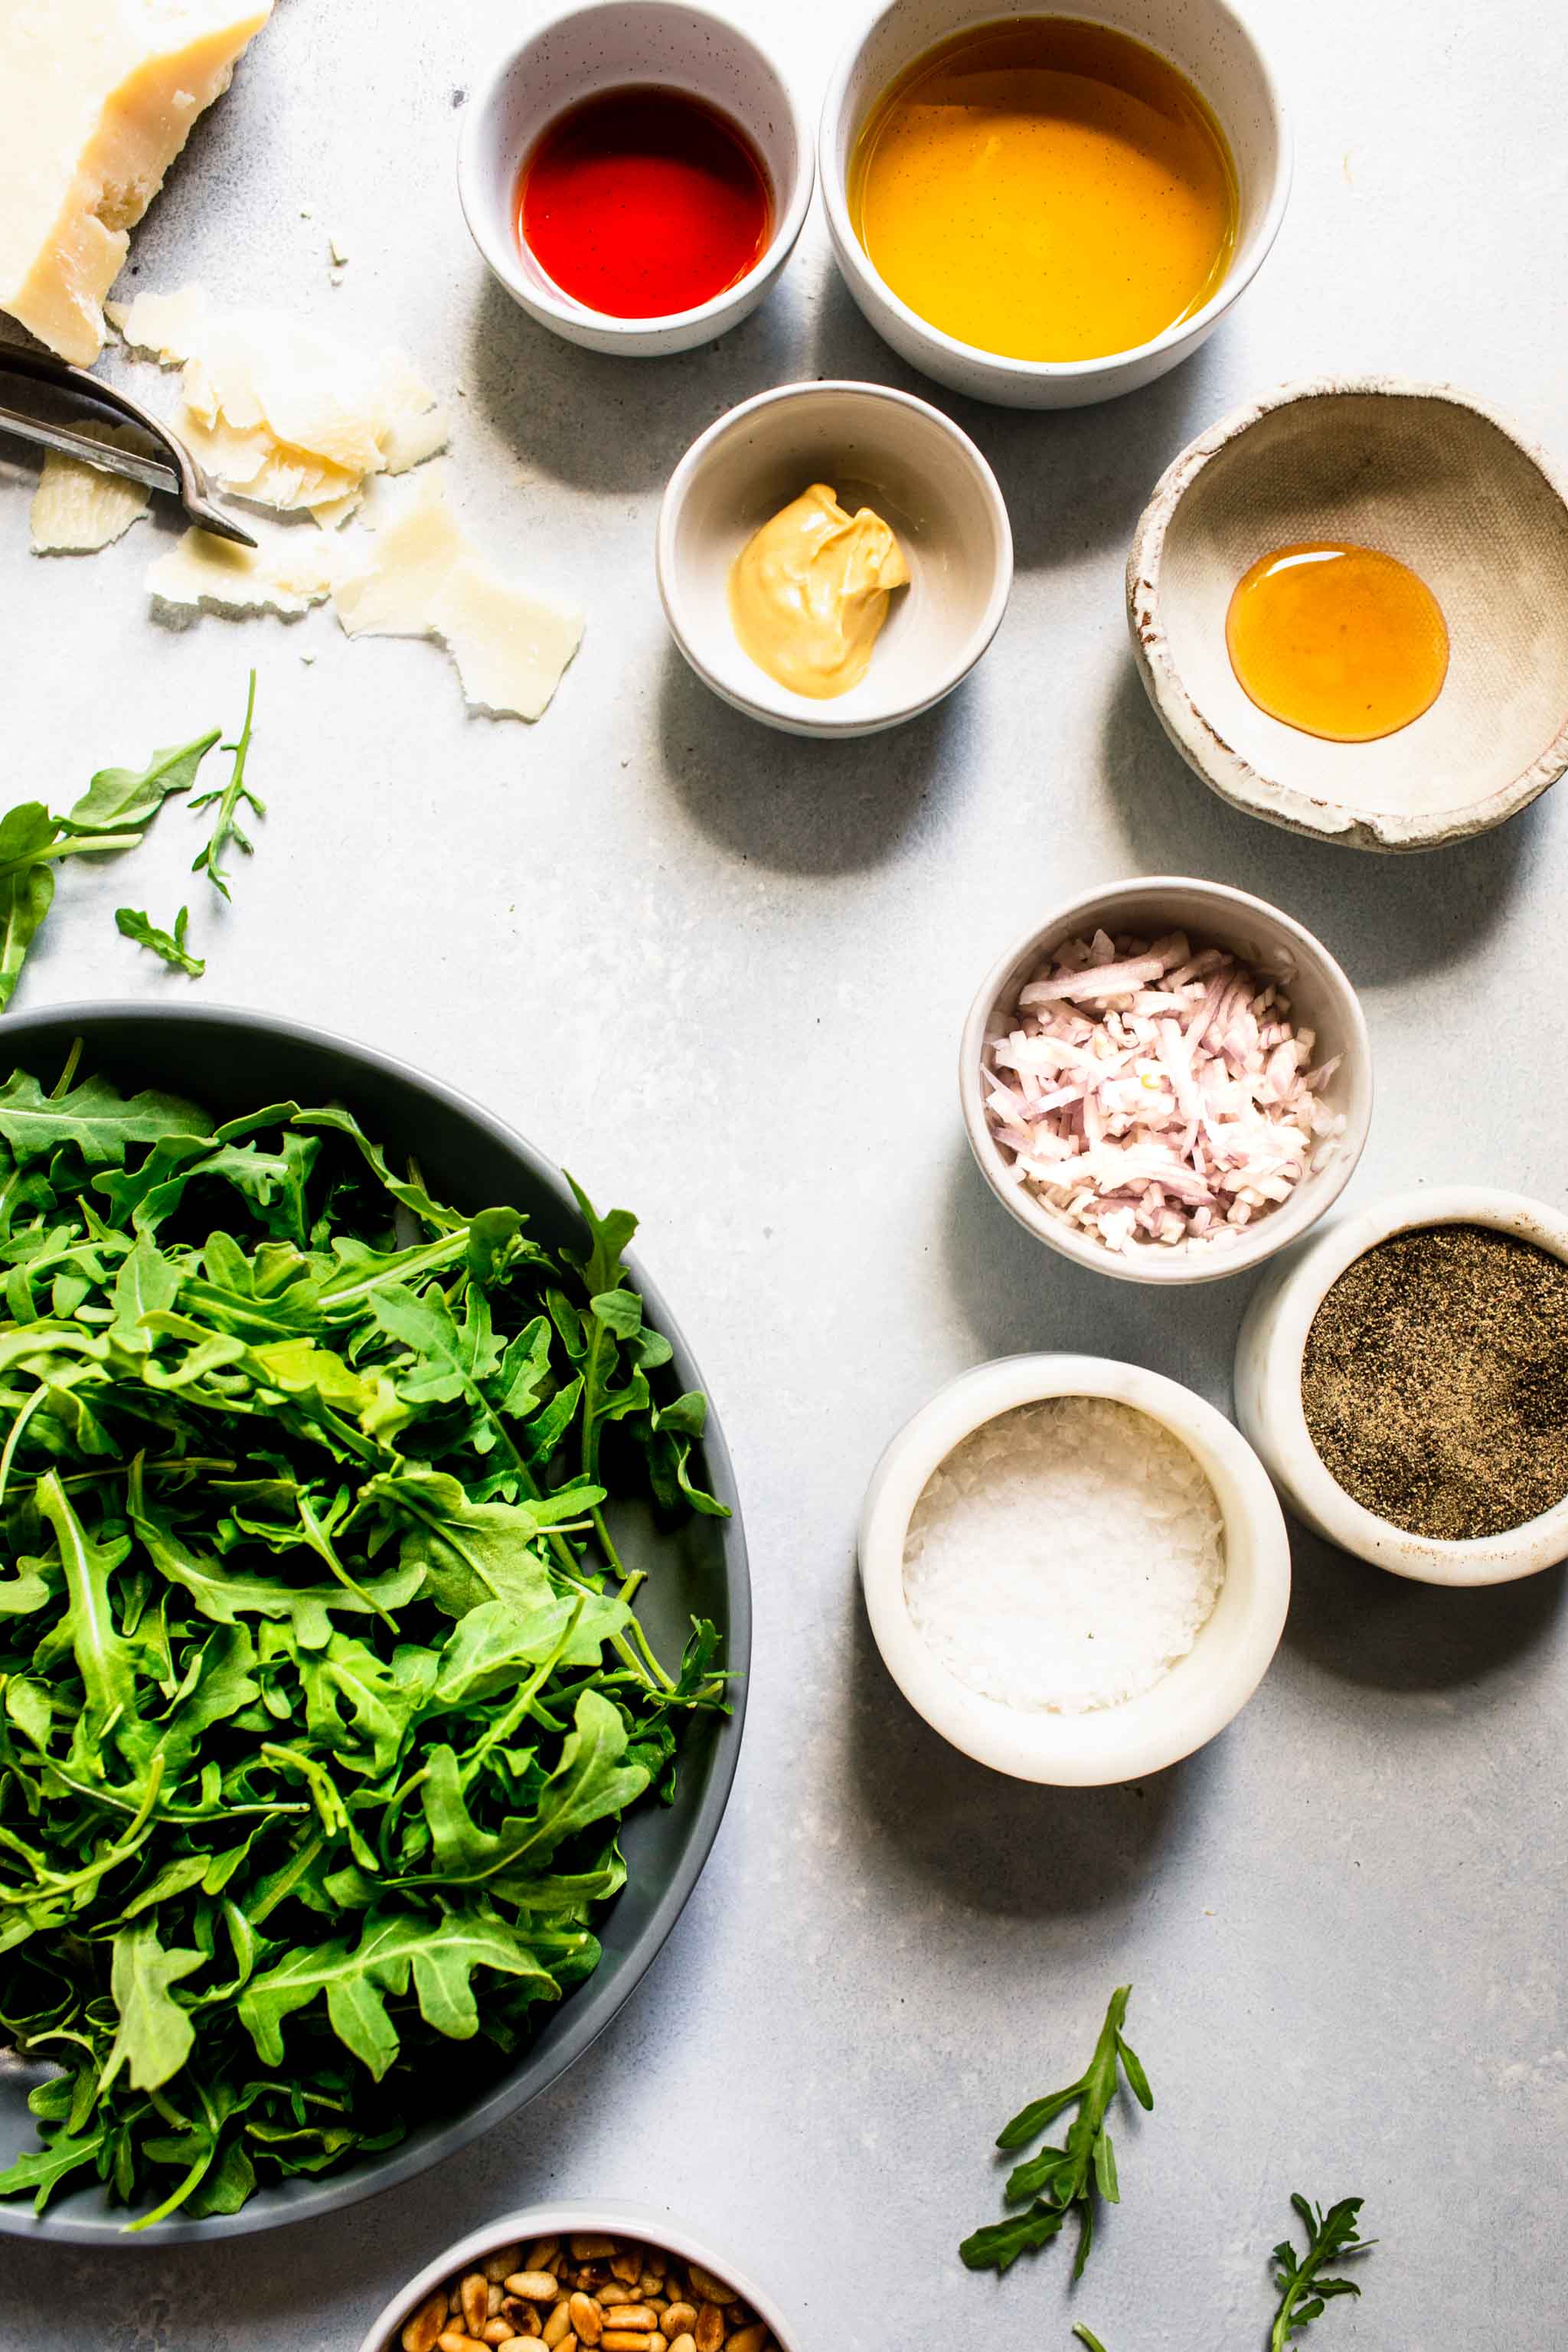 Ingredients for arugula salad laid out on table.